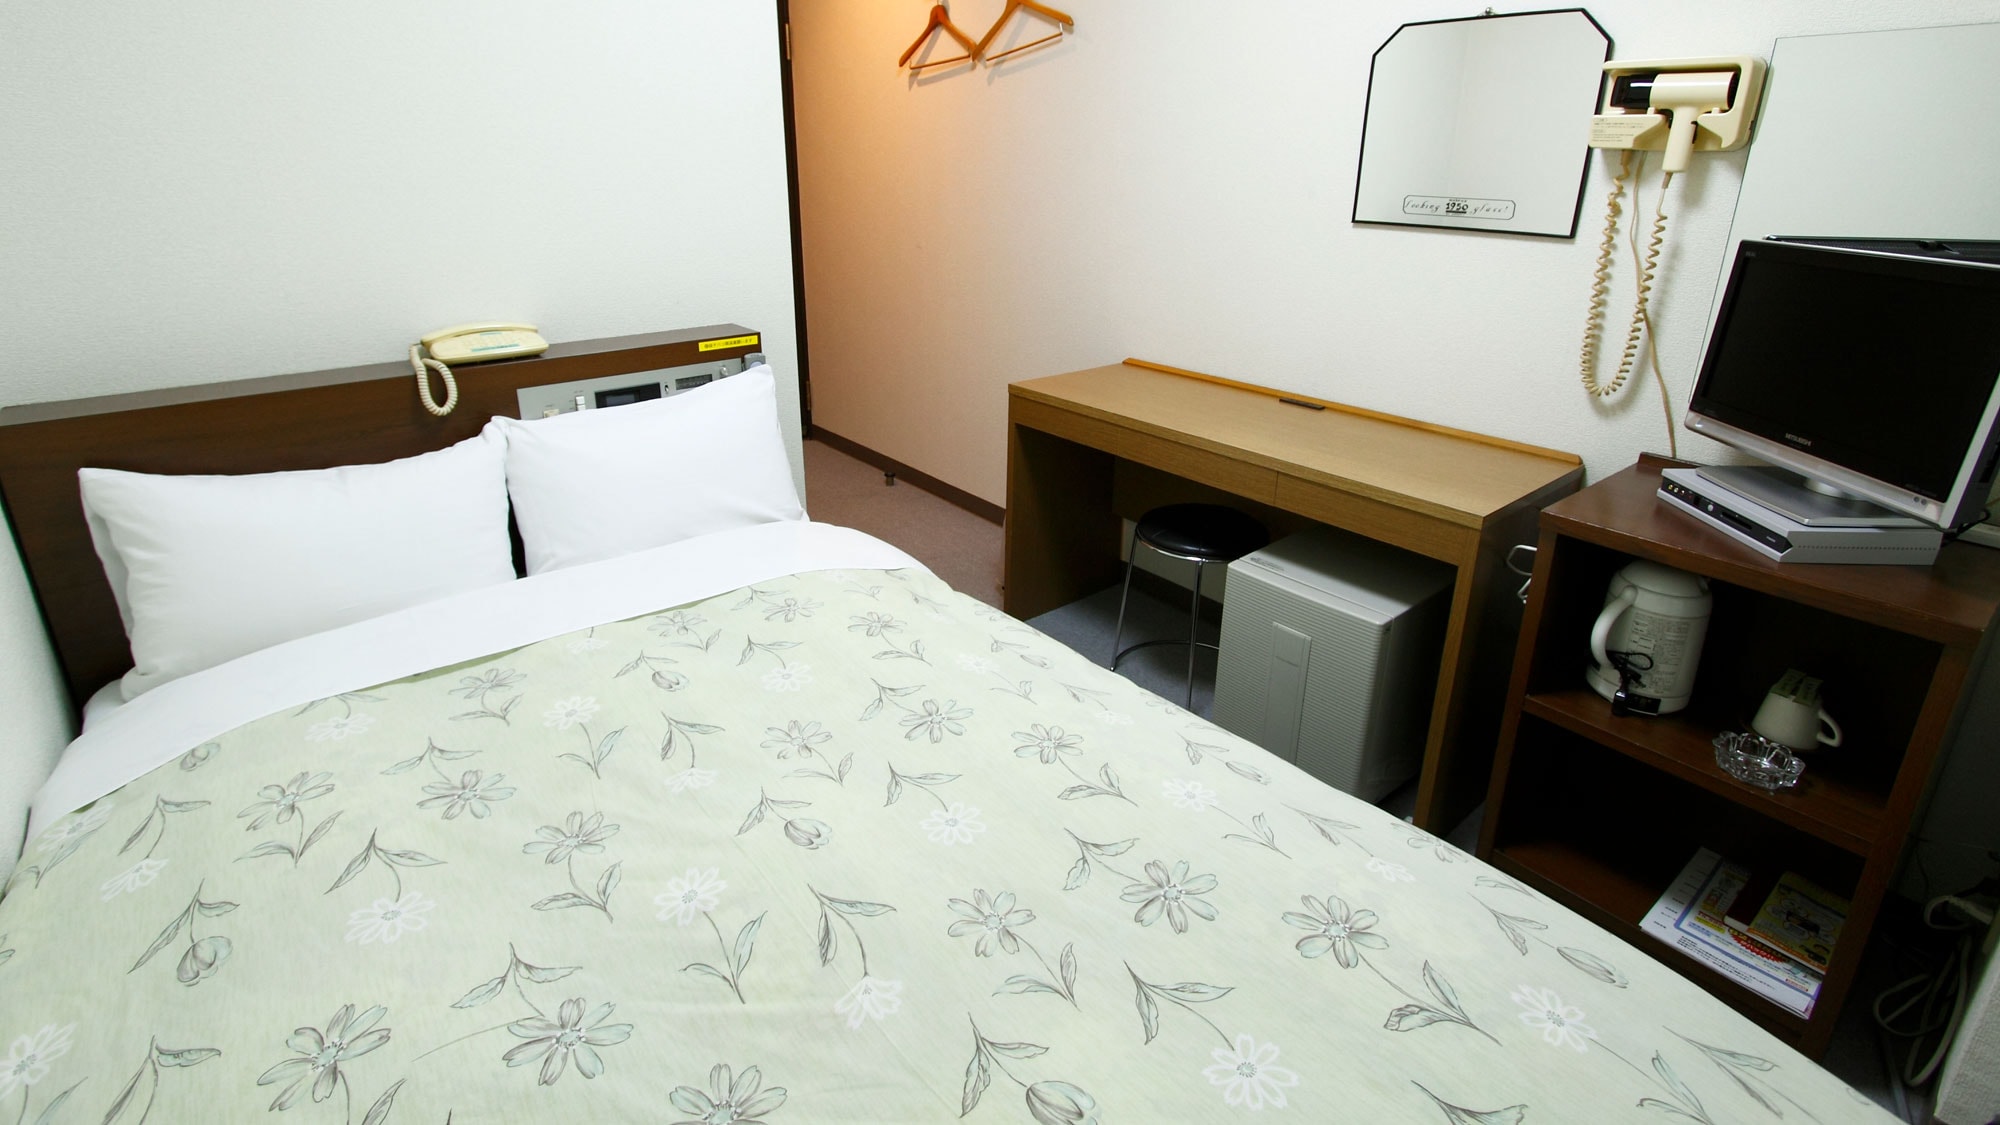  [Semi-double room] We have plans for two people as well as for one person.